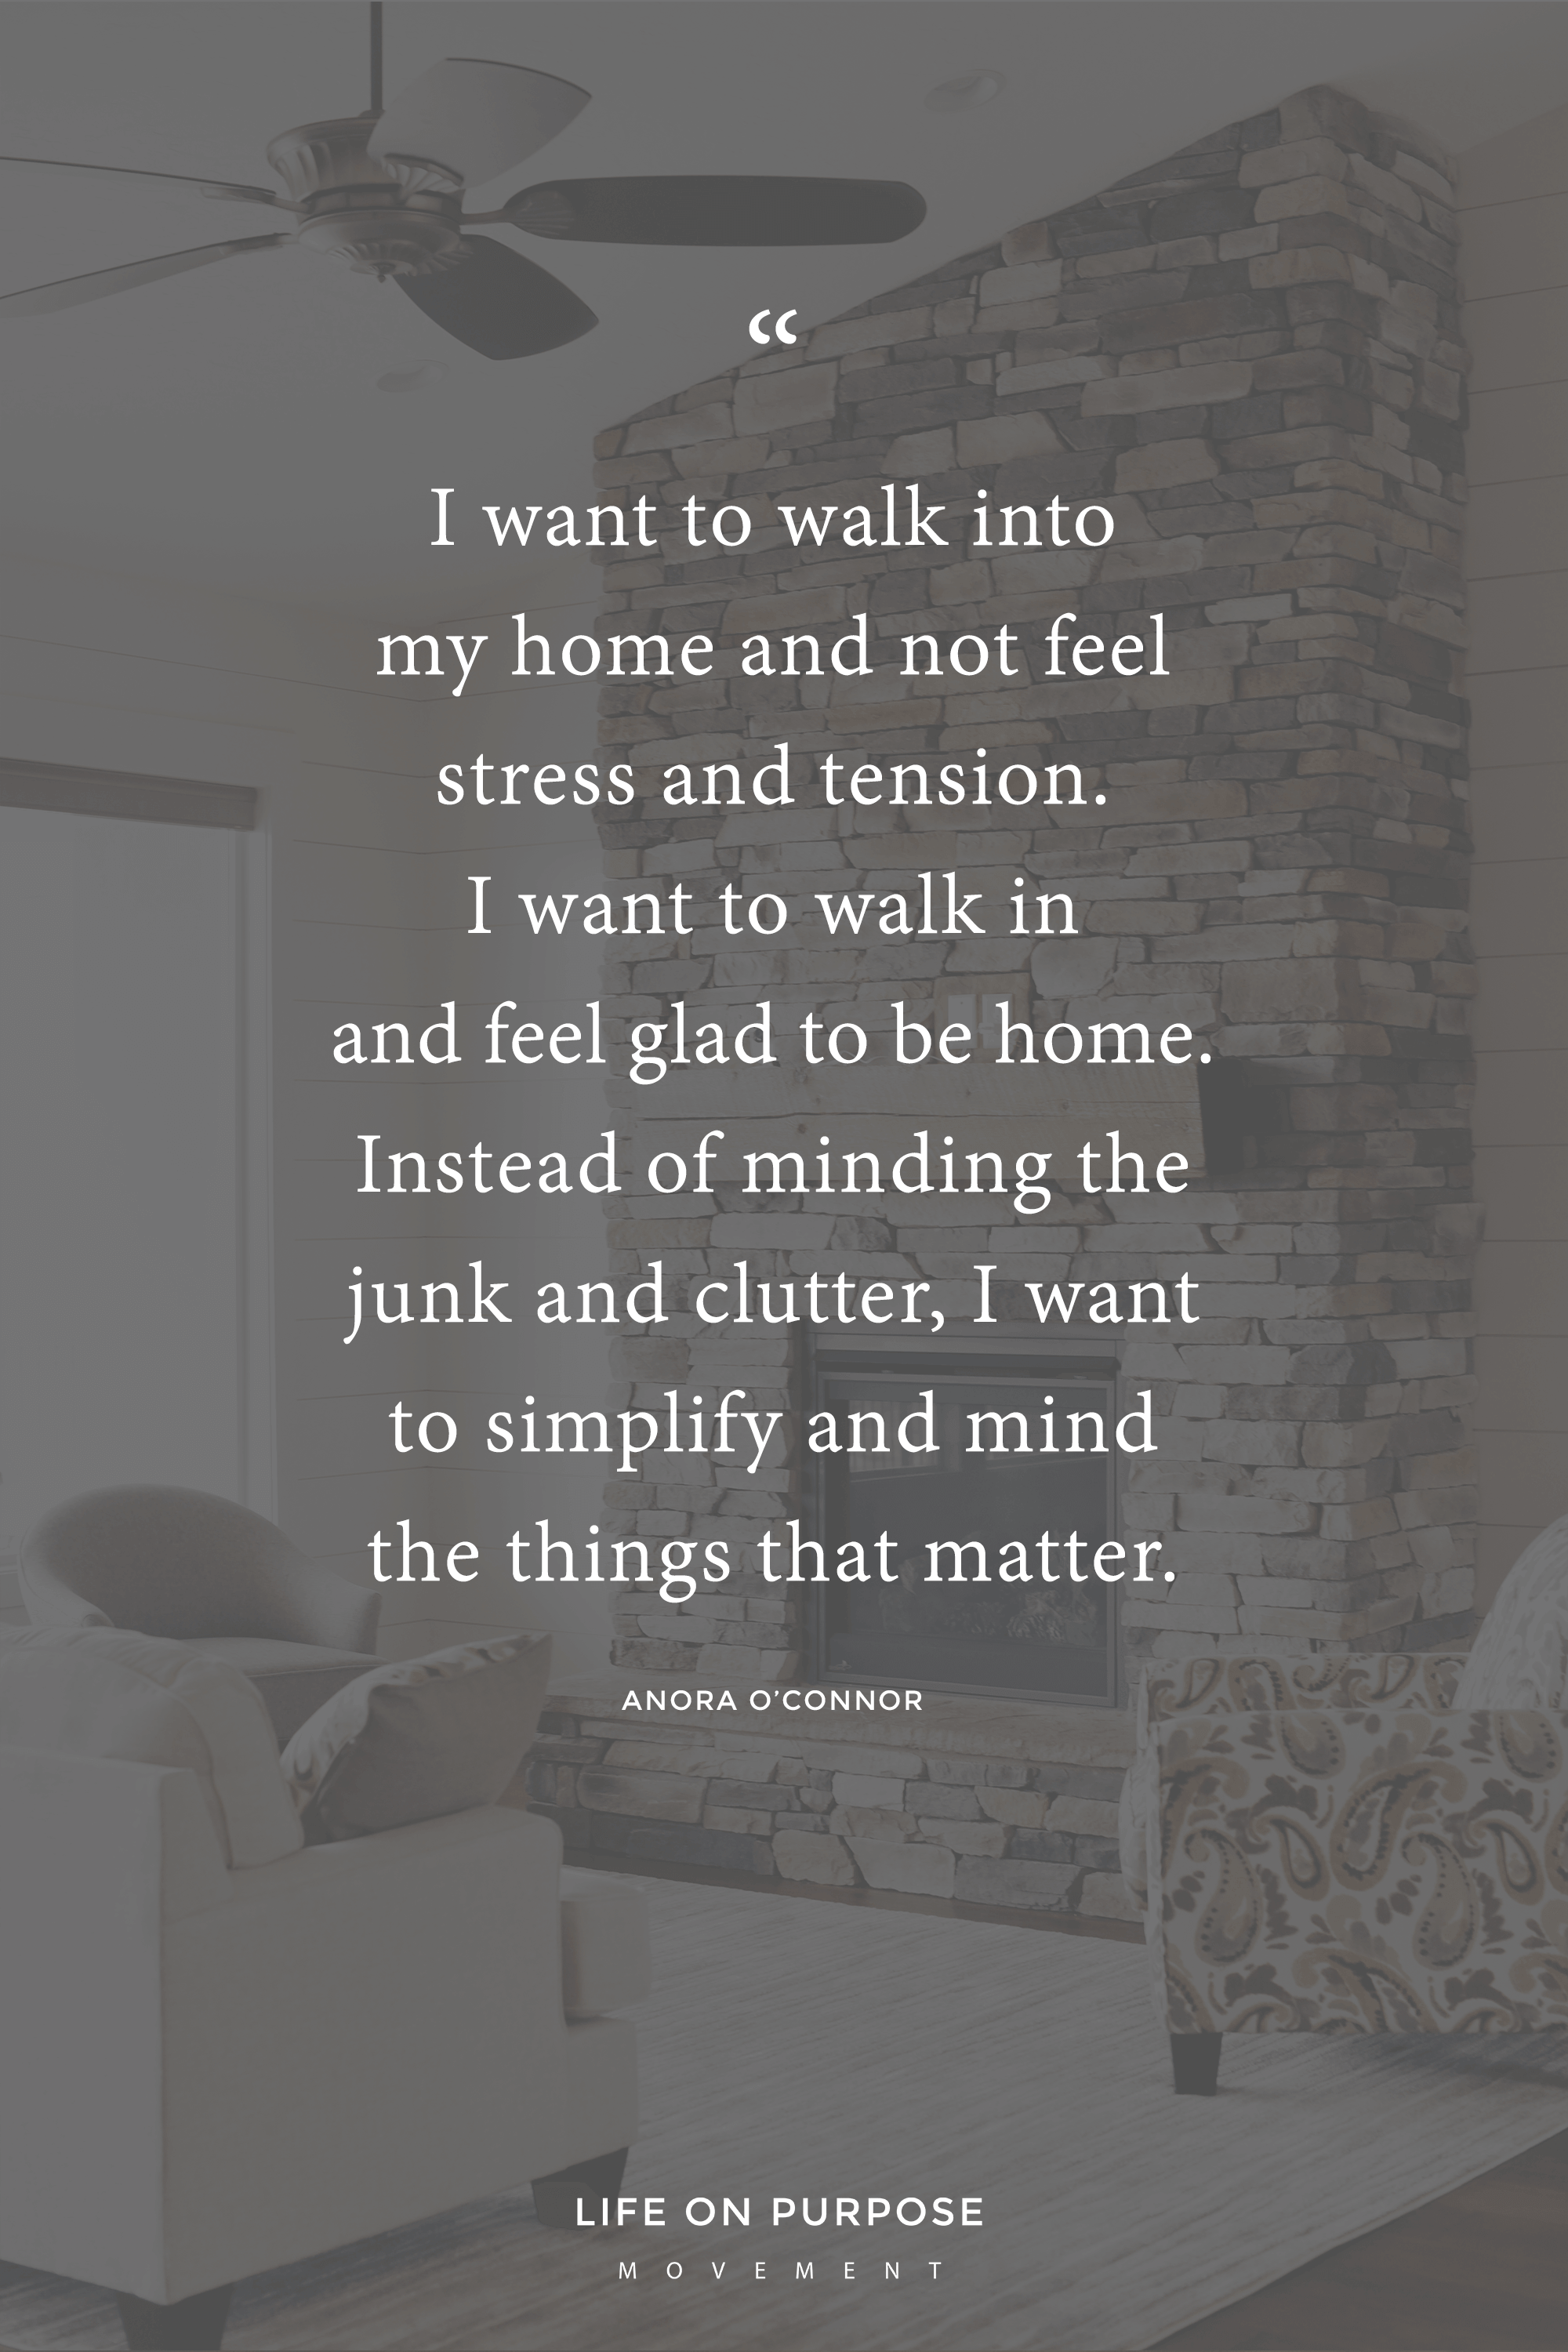 https://ericalayne.co/wp-content/uploads/2018/12/I-want-to-walk-into-my-home-reader-quote.png